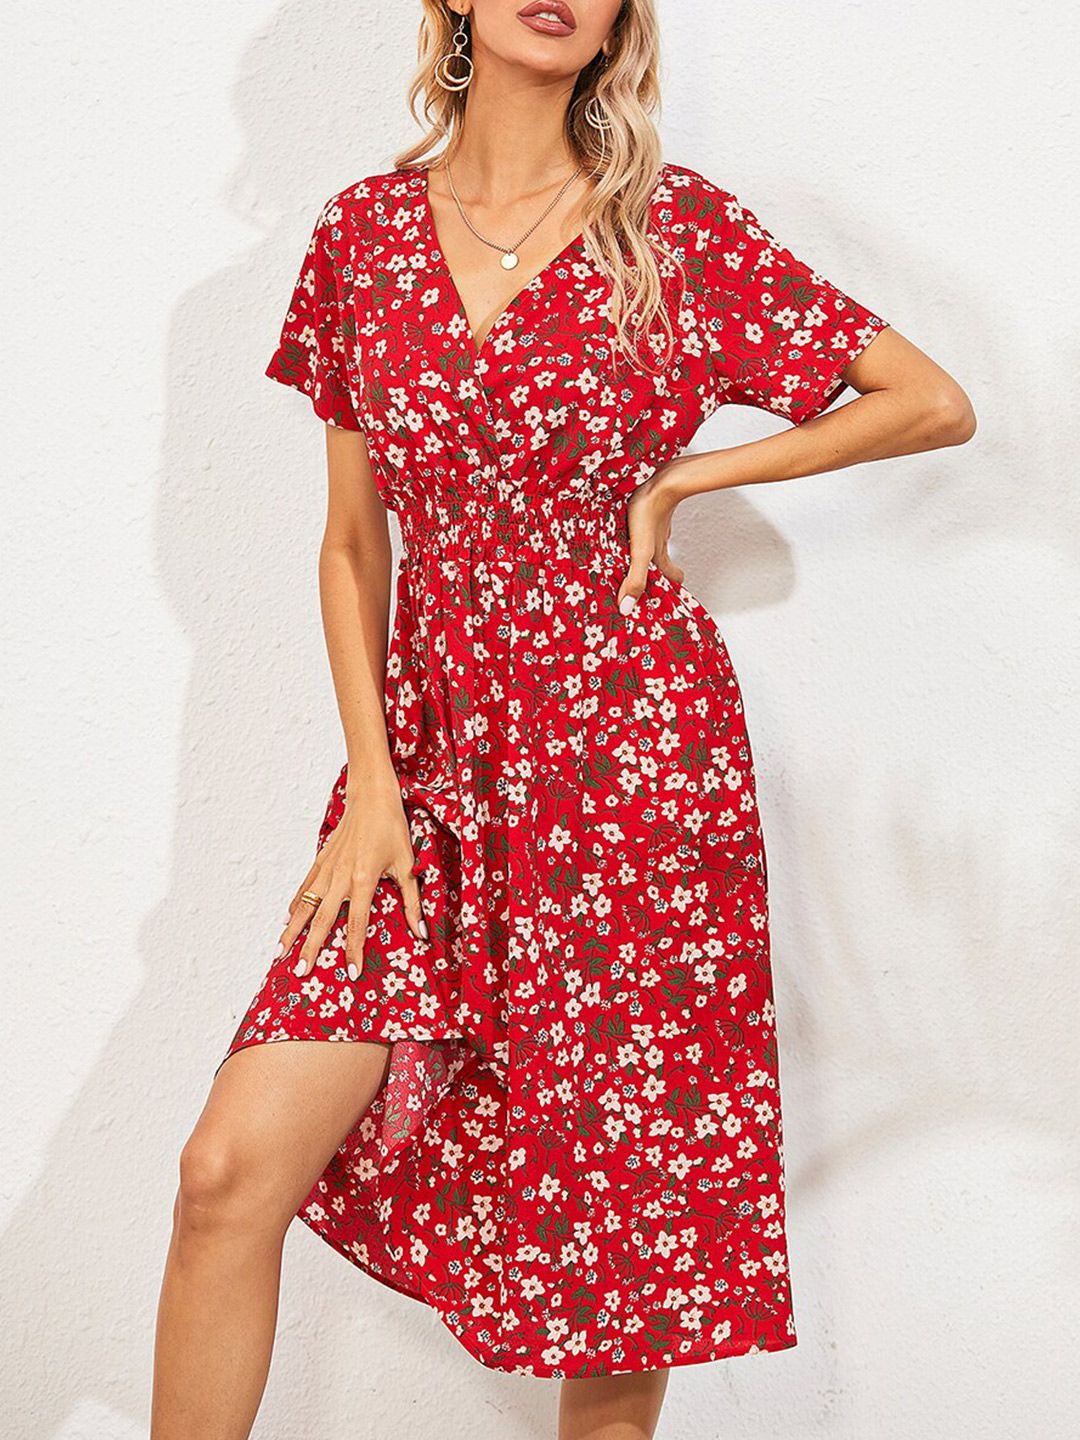 URBANIC Red Floral Dress Price in India